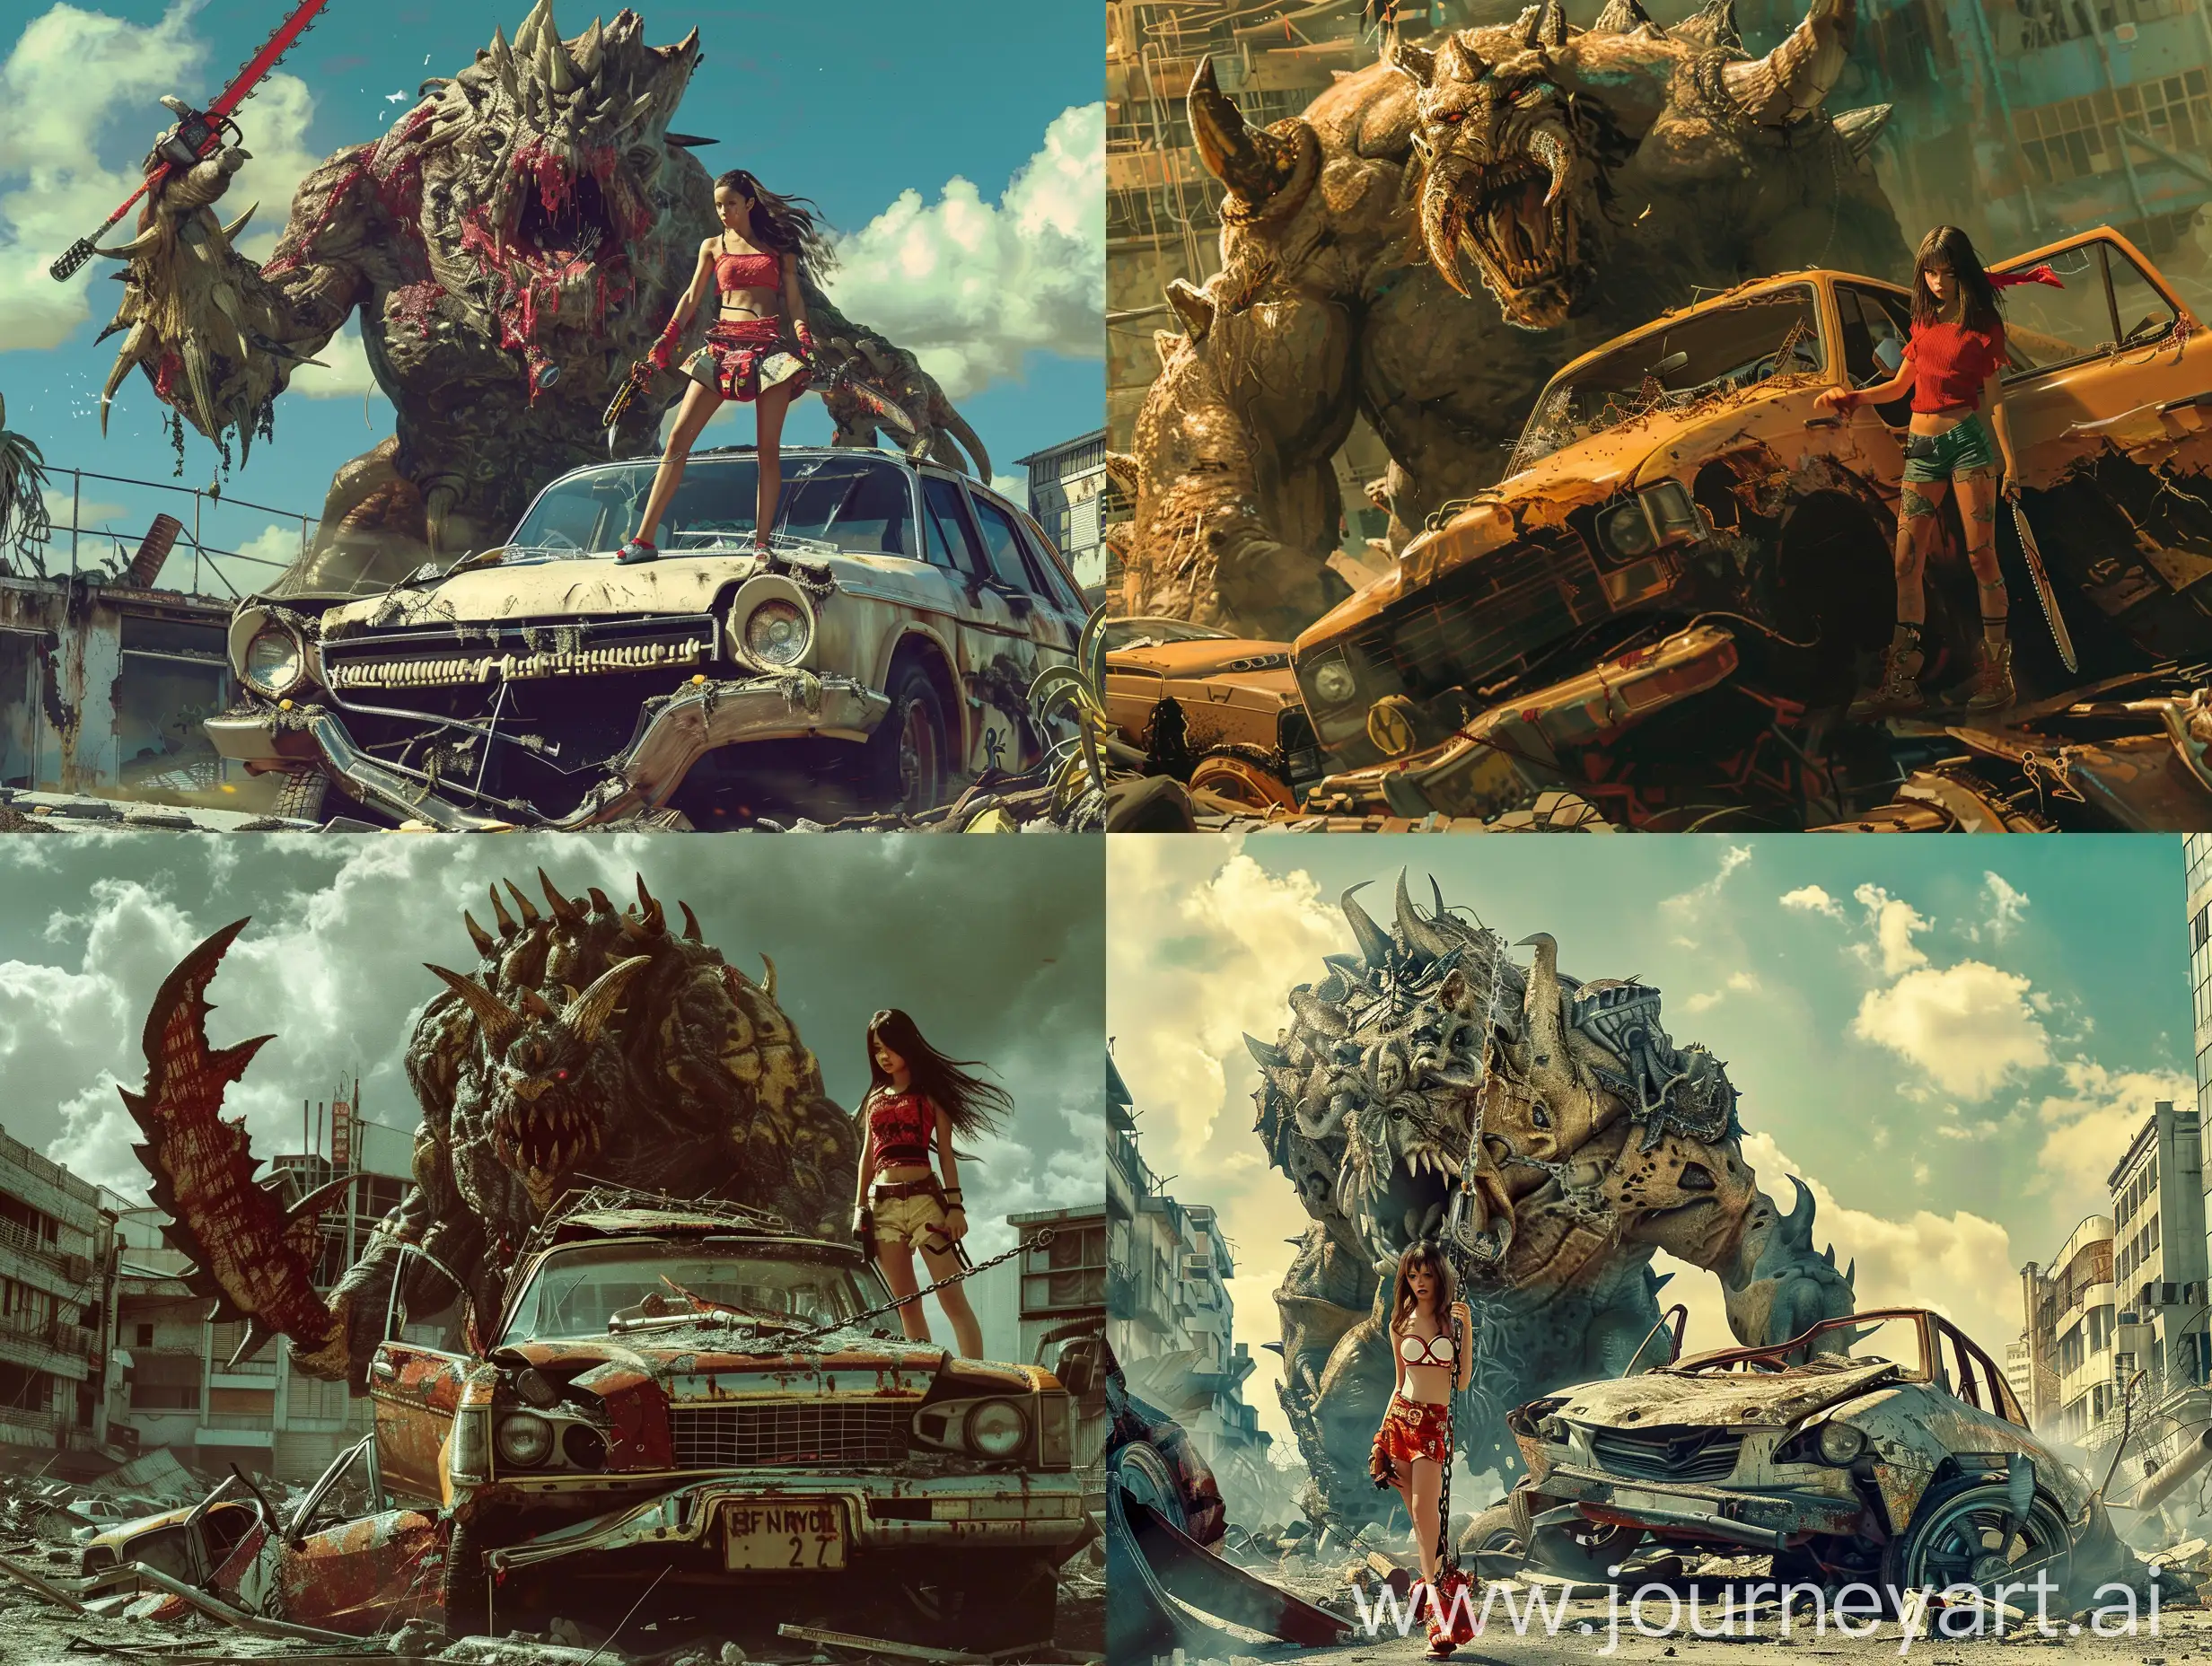 movie still, car junkyard, girl standing on the hood of a broken car, holding a chainsaw, Beautiful fantasy art. Female Warrior girl rules alongside enormous wicked creature . In the style of Luis royo —style raw